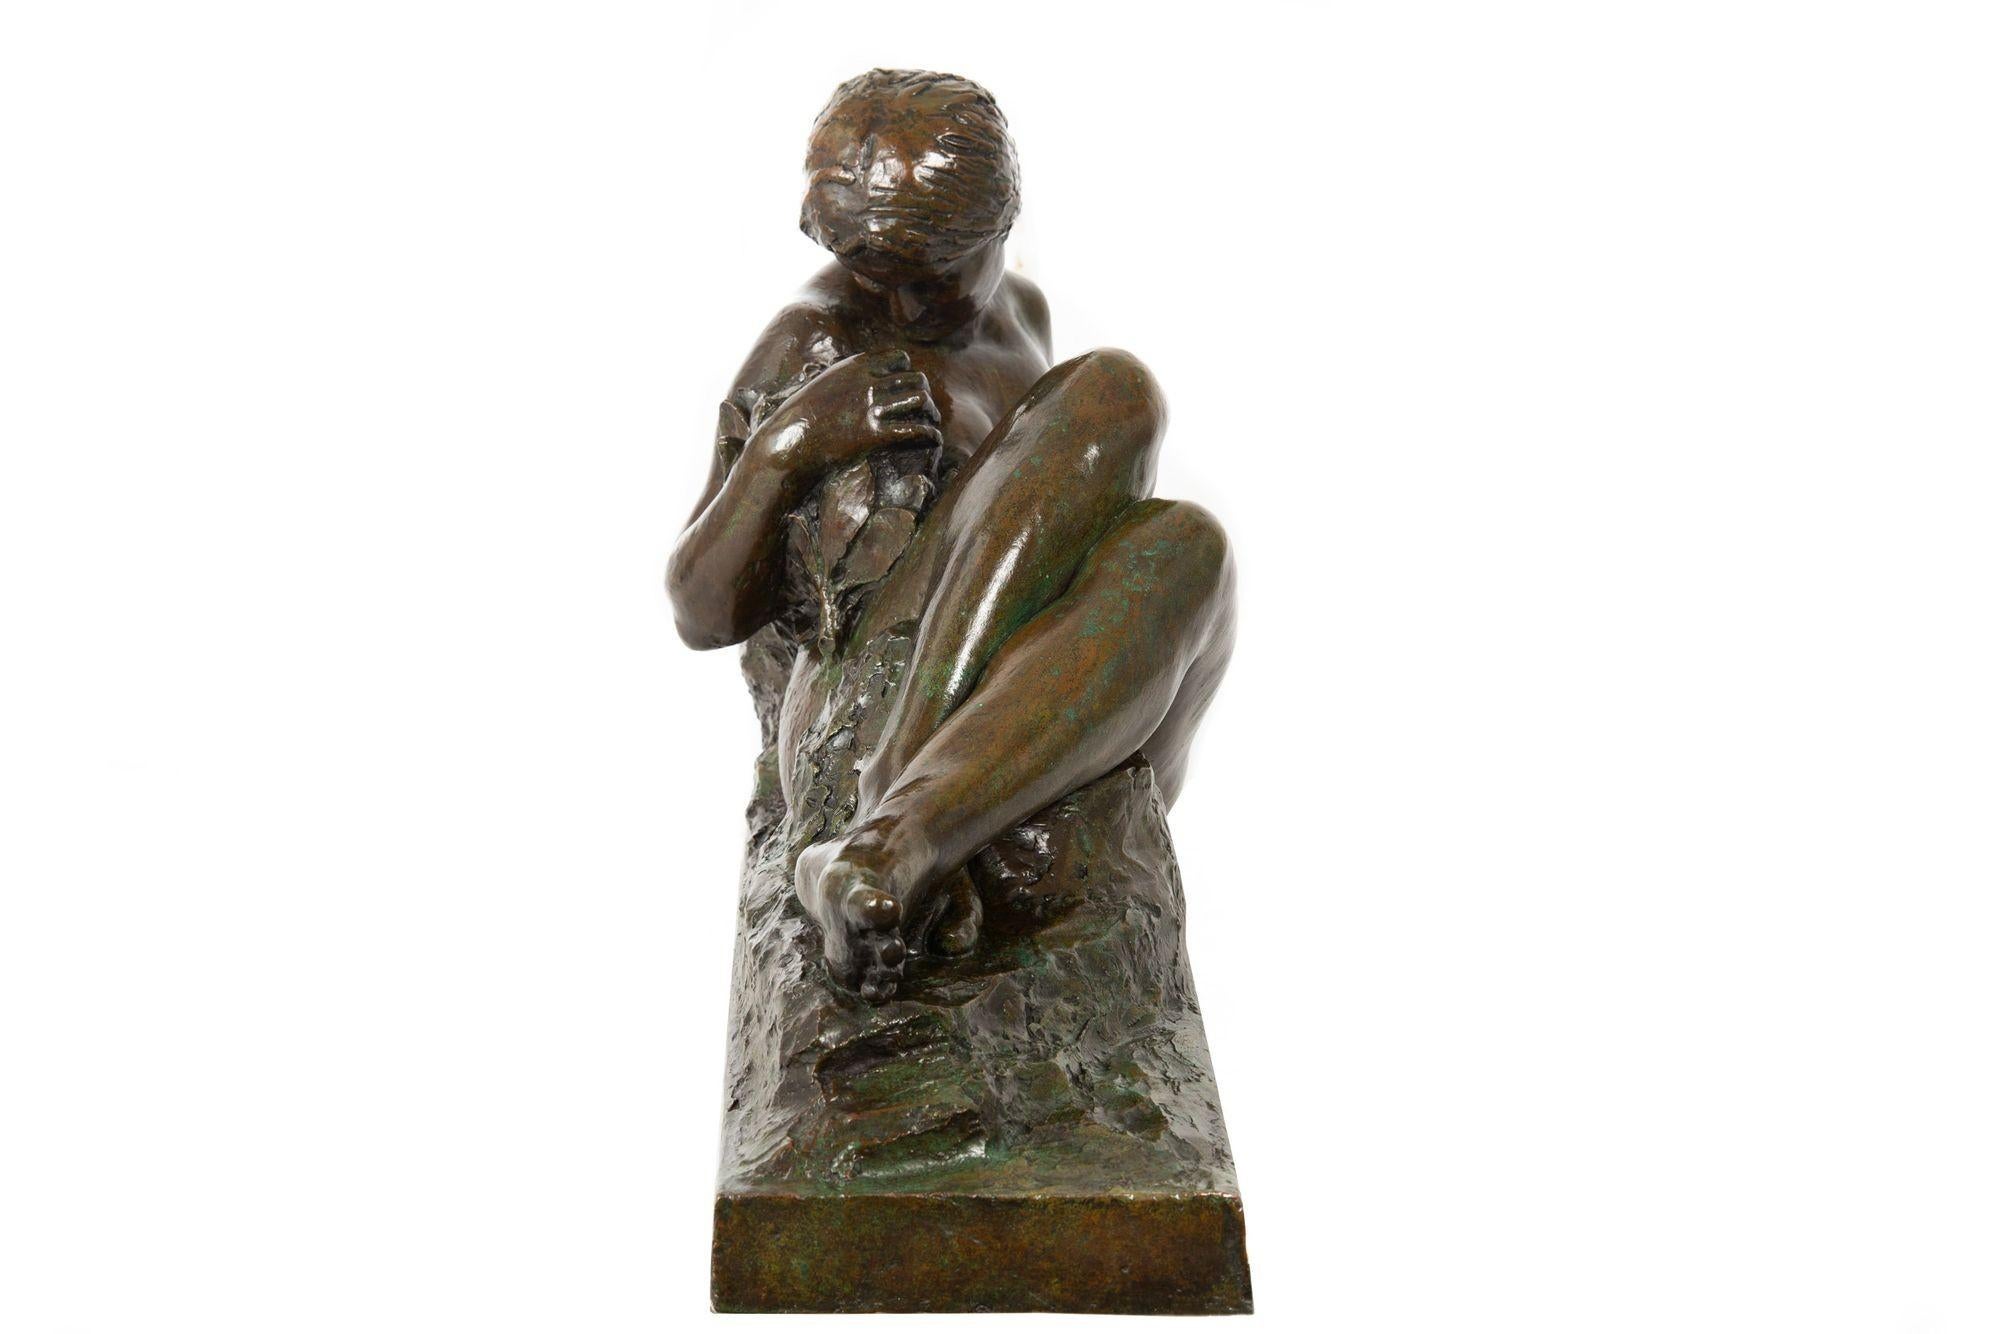 20th Century Rare French Modernist Bronze Sculpture of “Eve” (1937) by Aime Octobre For Sale